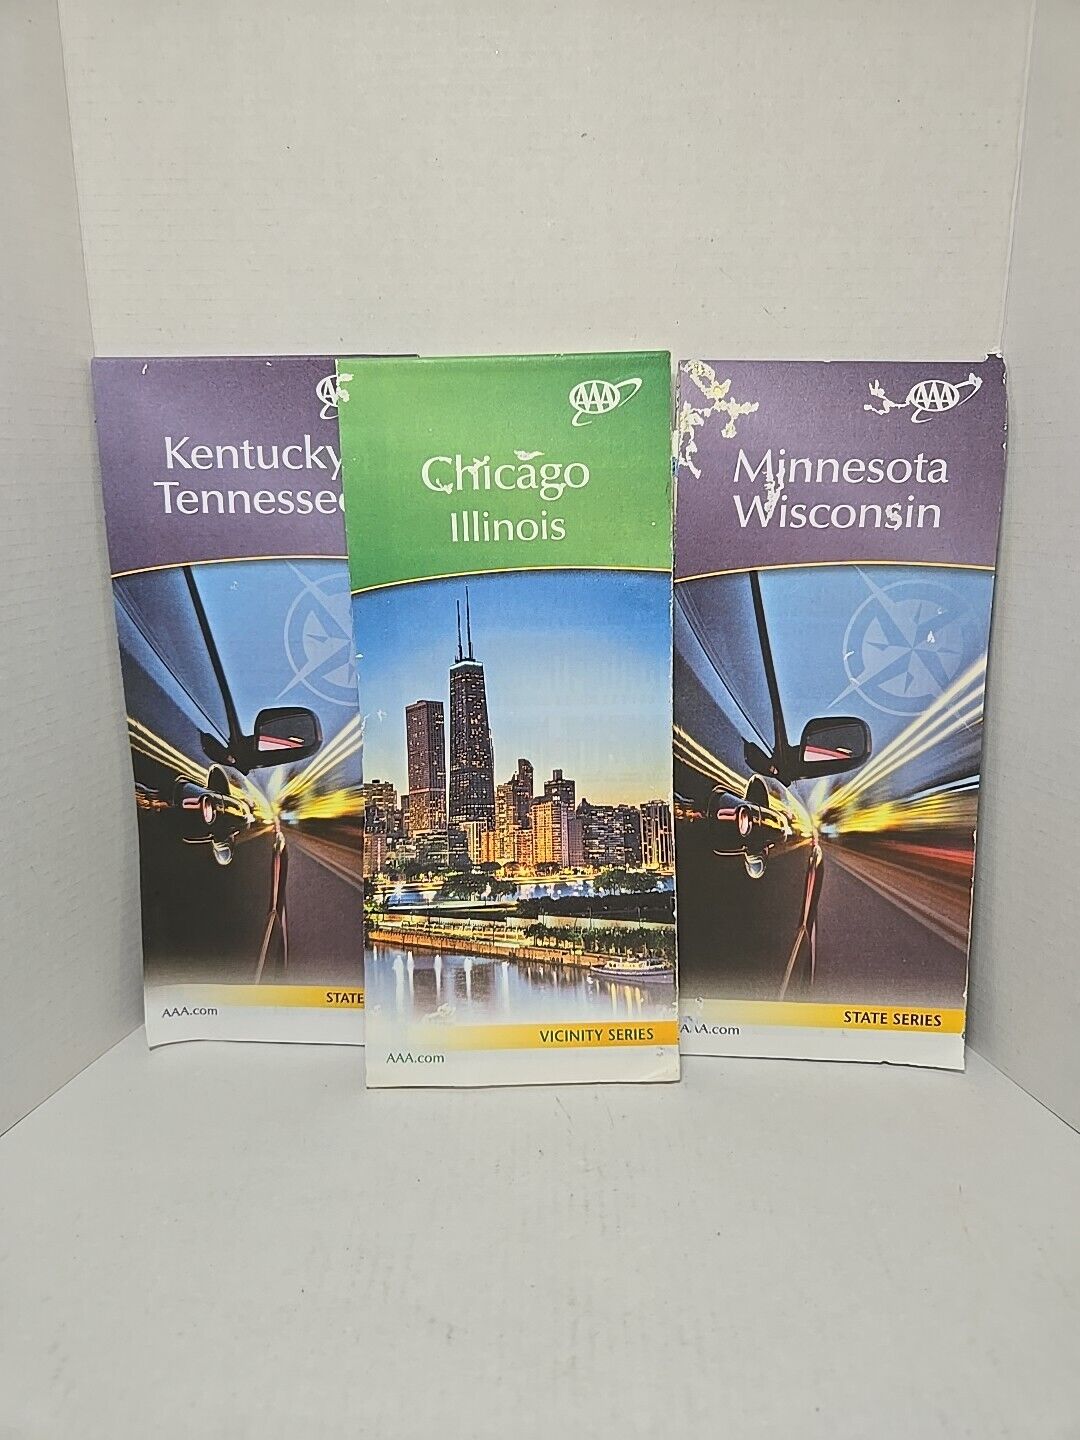 Lot Of 3 AAA Road Maps Chicago Minnesota Kentucky State Series & Vicinity Series